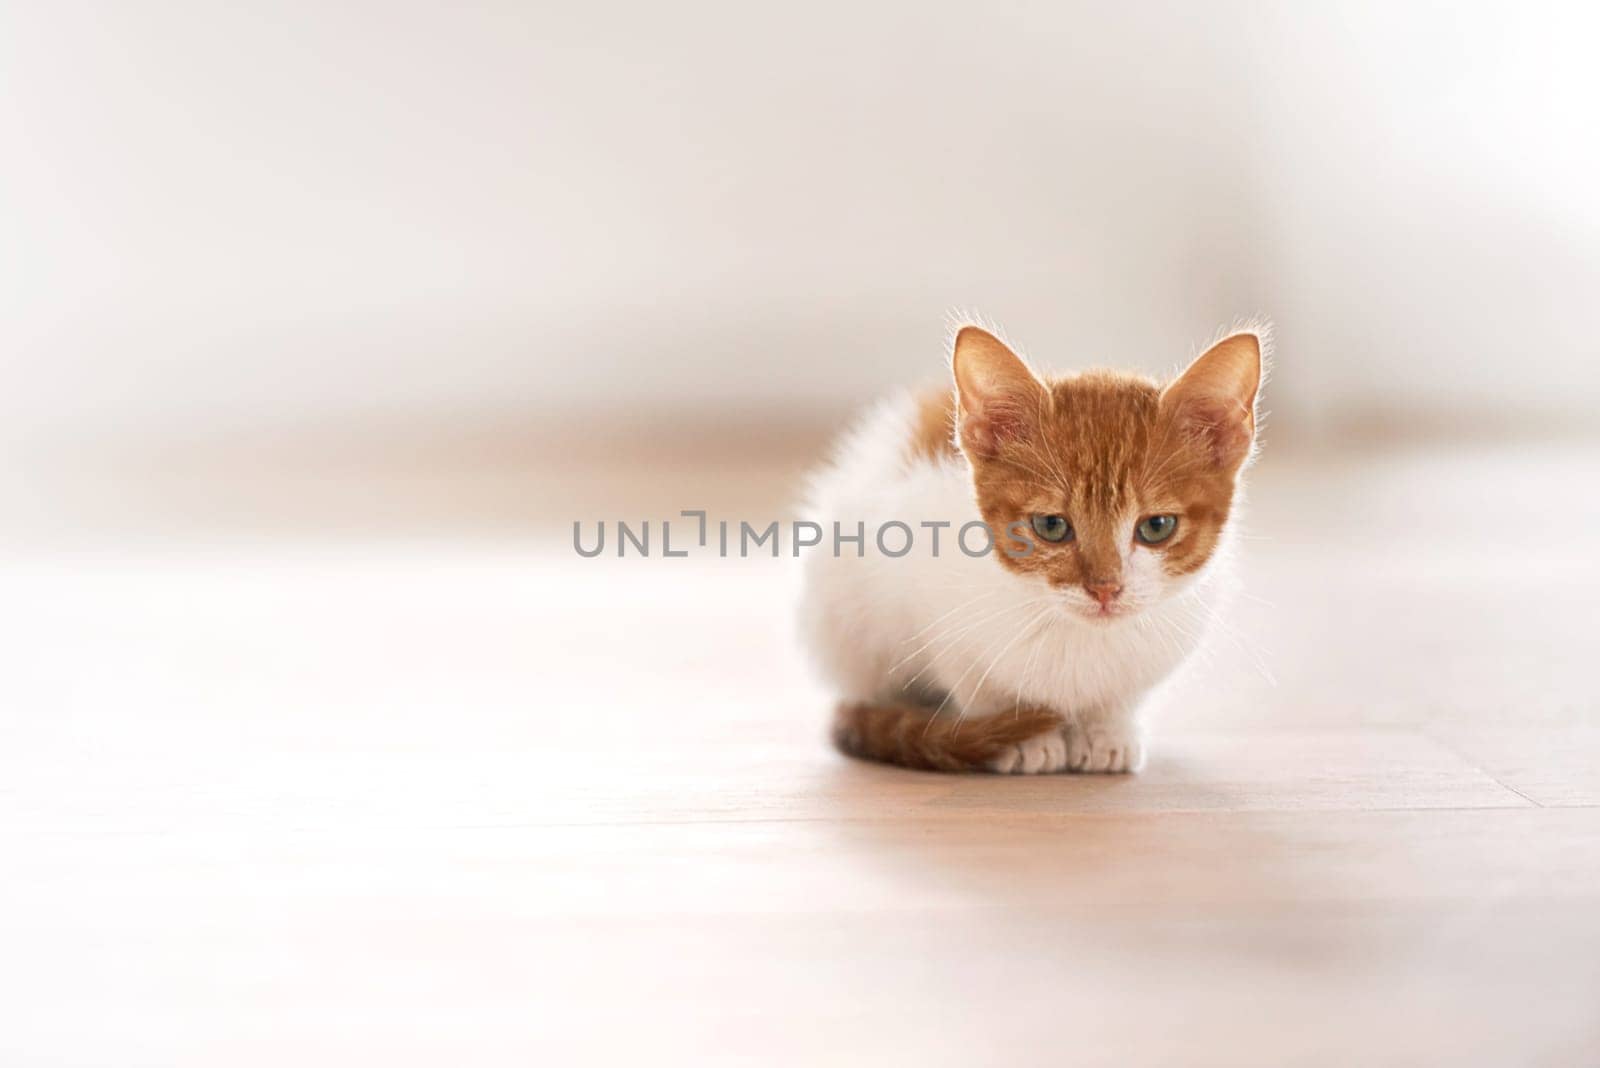 Pets, animal care and cat on a floor in a house waiting, chilling and sitting on a floor looking curious. Ginger, watching and kitten in a room at home for morning routine and games, cute and sweet.